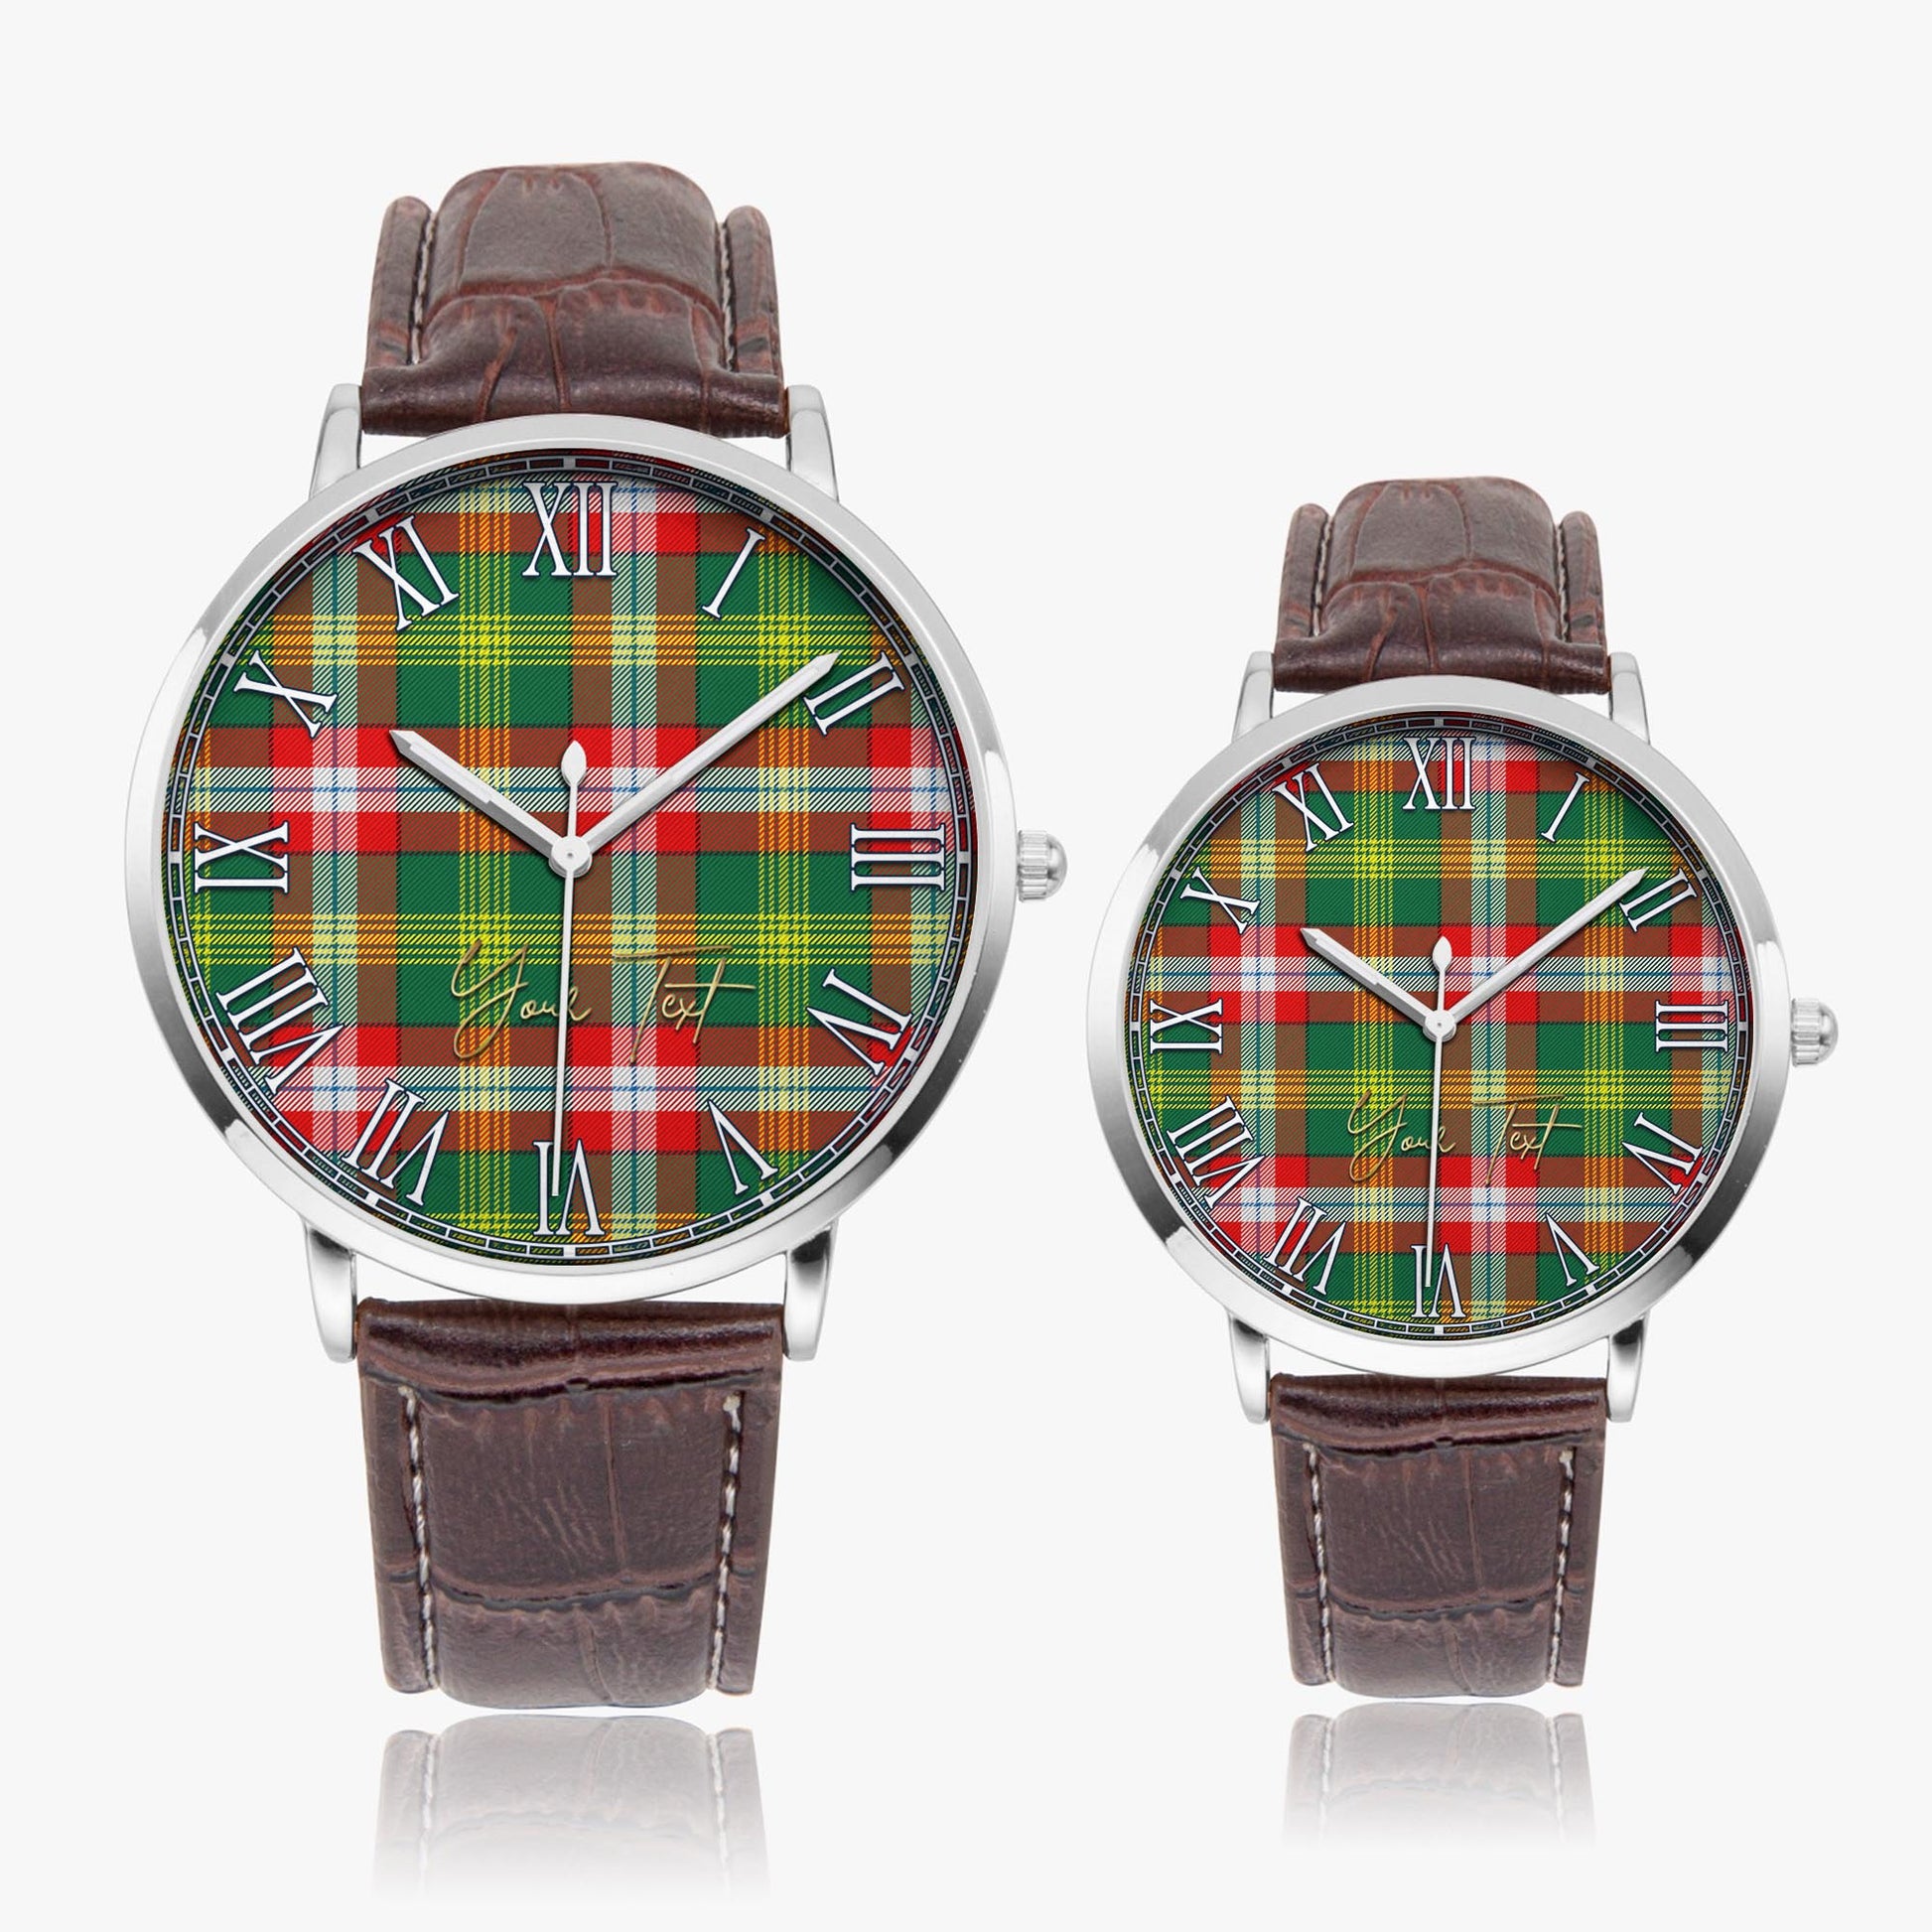 Northwest Territories Canada Tartan Personalized Your Text Leather Trap Quartz Watch Ultra Thin Silver Case With Brown Leather Strap - Tartanvibesclothing